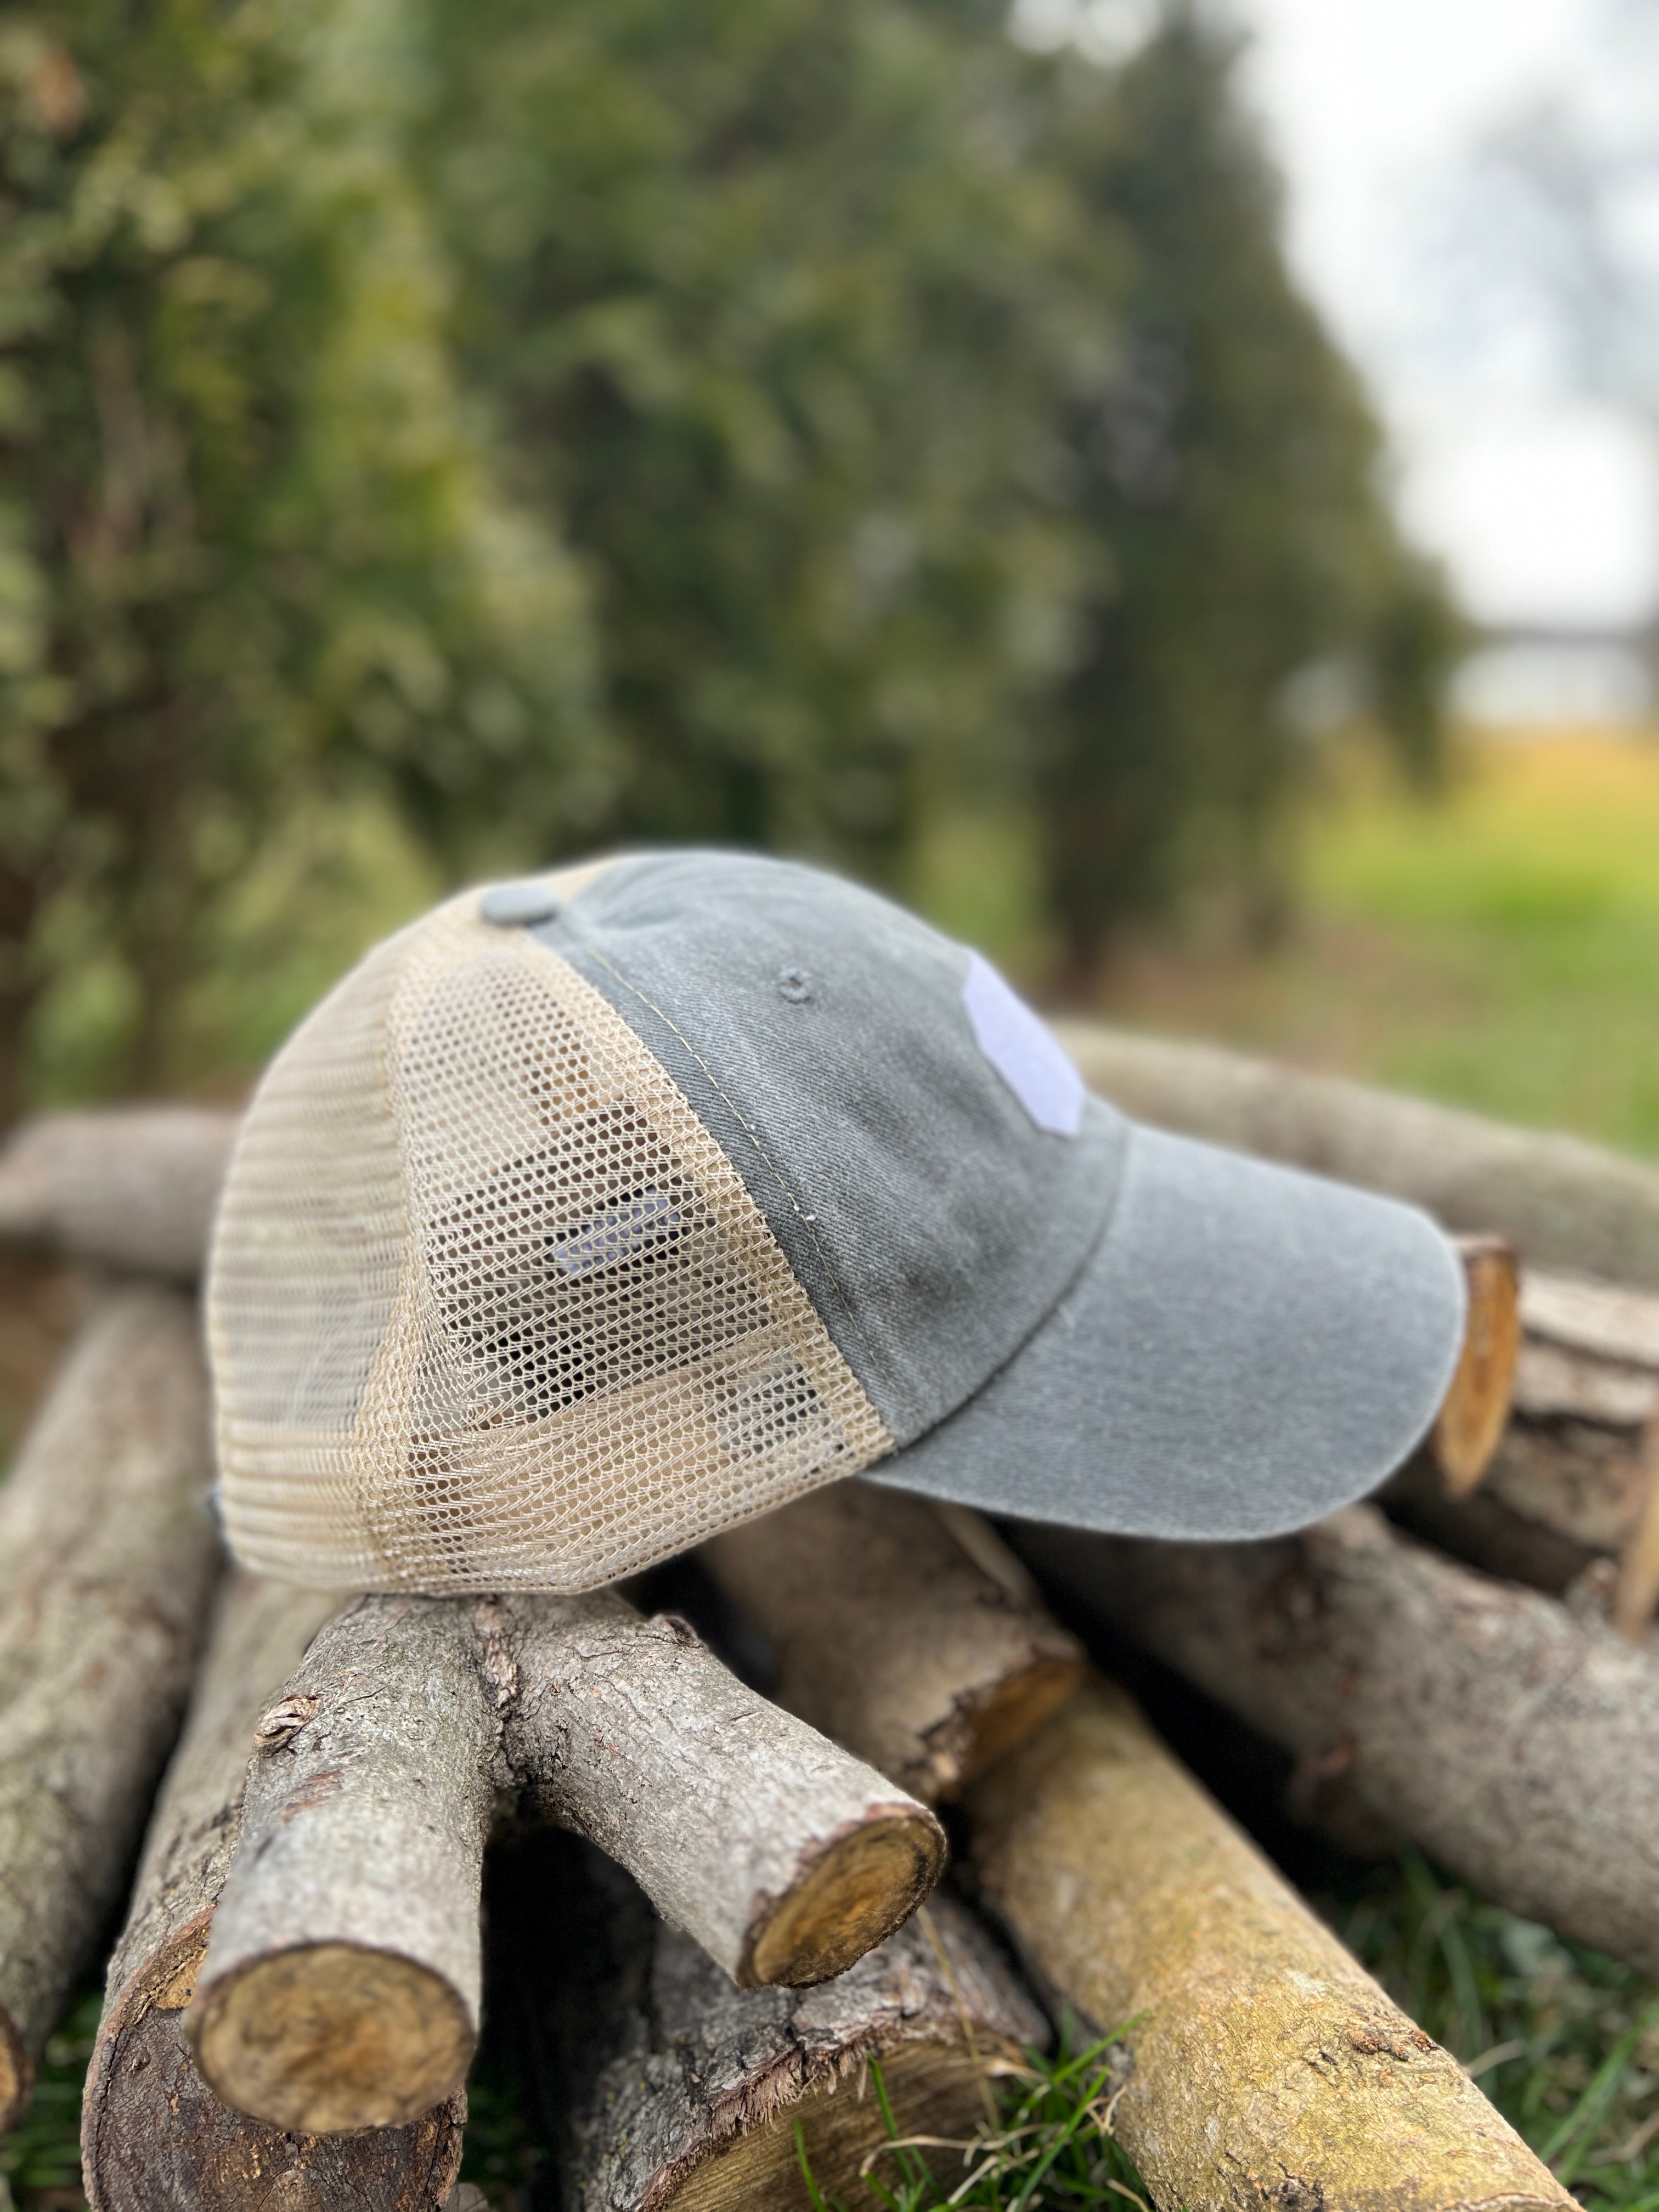 Adult Swappable Dad Hat - Gray